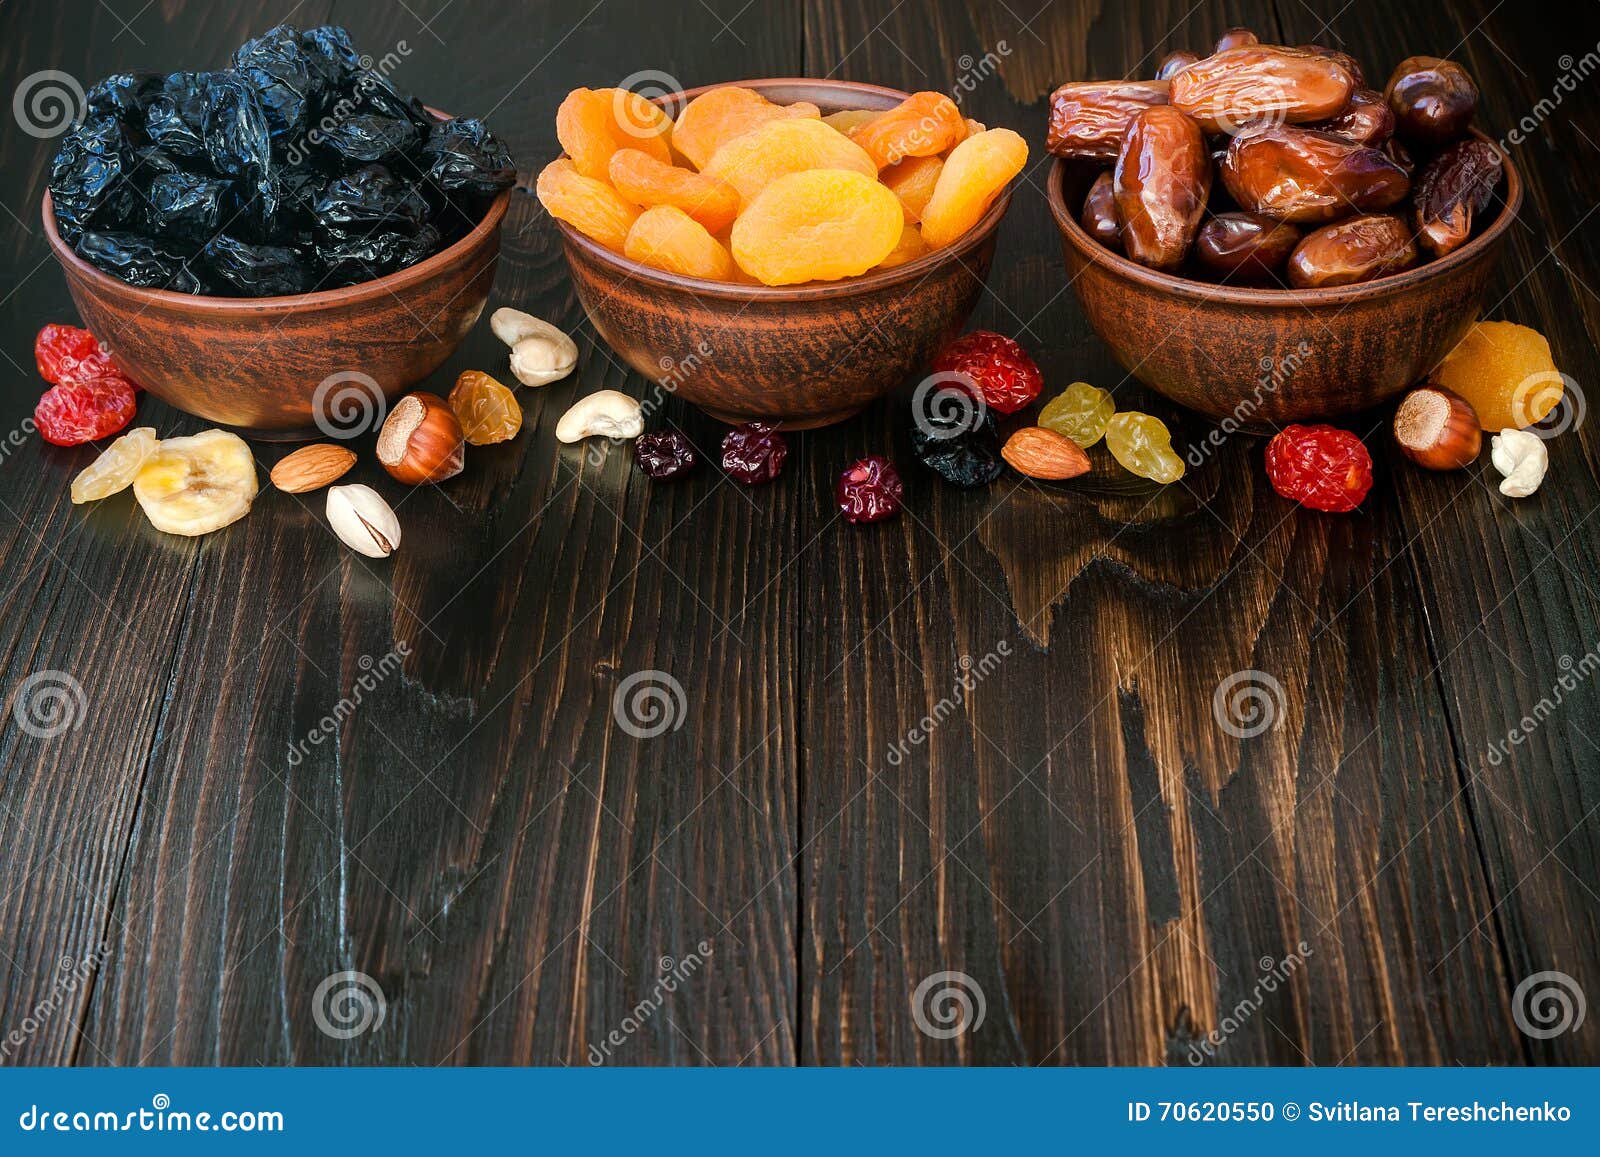 mix of dried fruits and nuts on a dark wood background with copy space. s of judaic holiday tu bishvat.